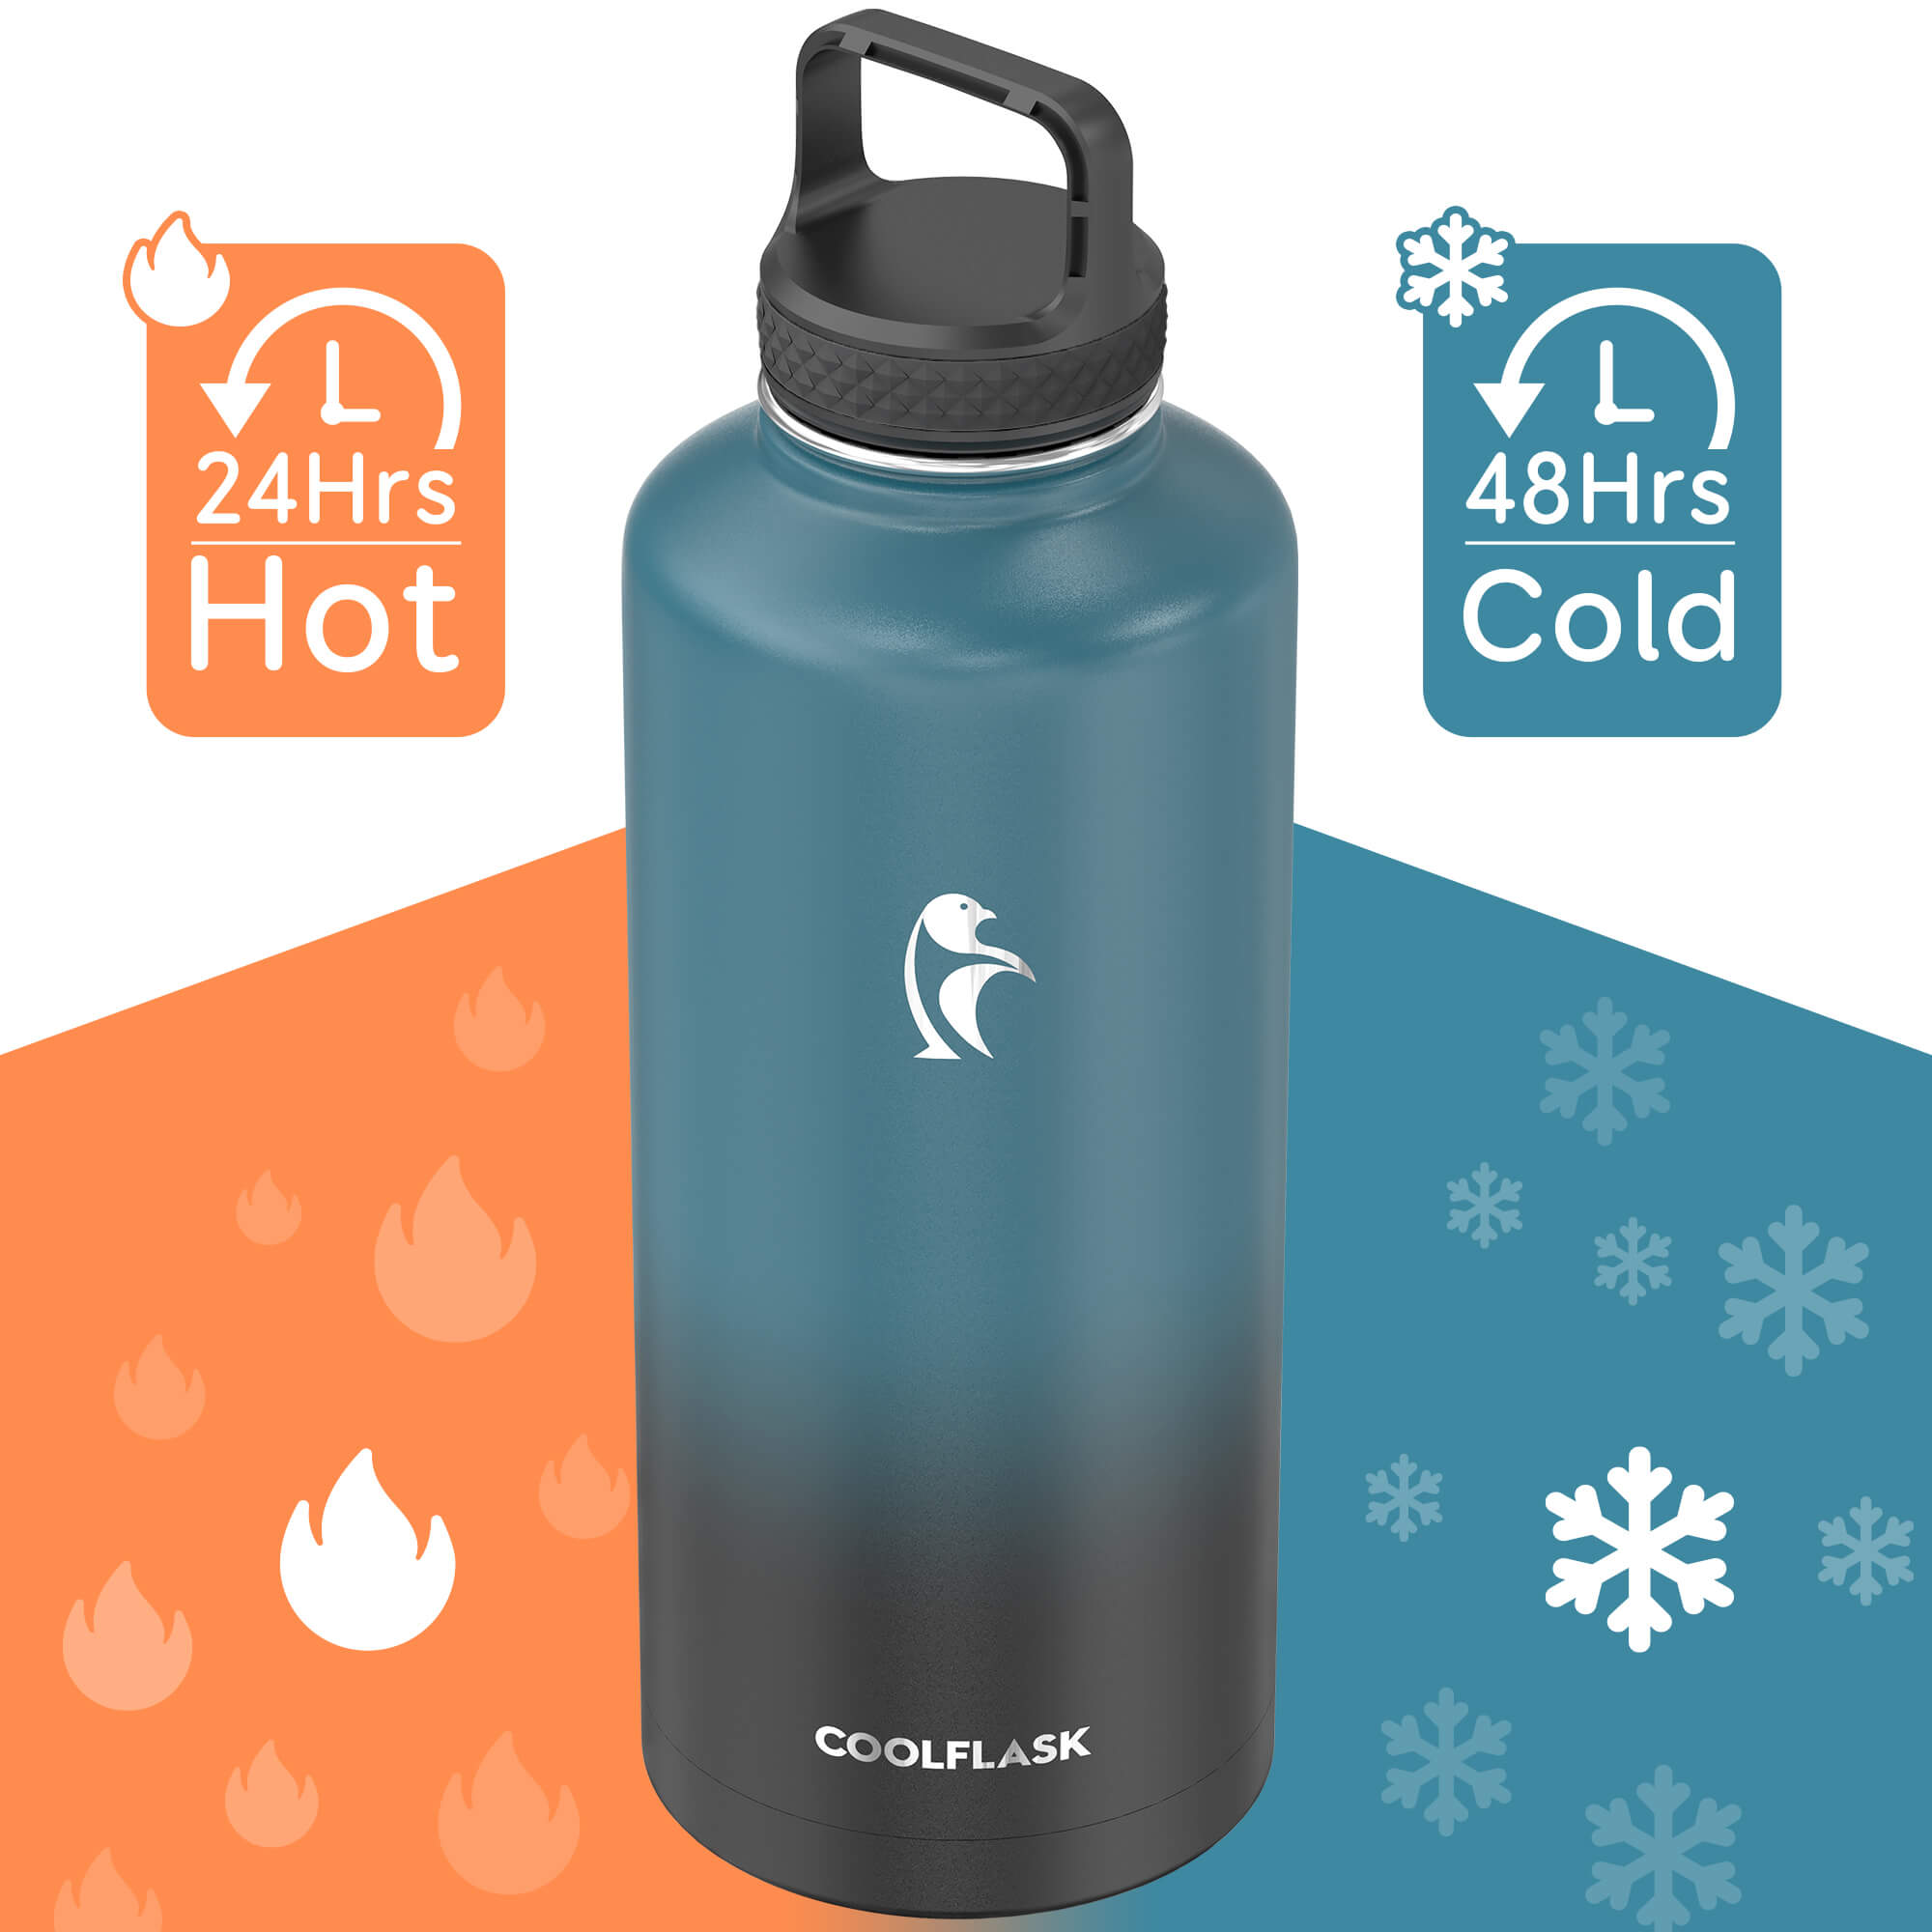 Coolflask Insulated Water Bottle 64 oz with Straw & 3 Lids, Half Gallon Water Jug Large Metal Stainless Steel Wide Mouth for Sports, Gym or Office